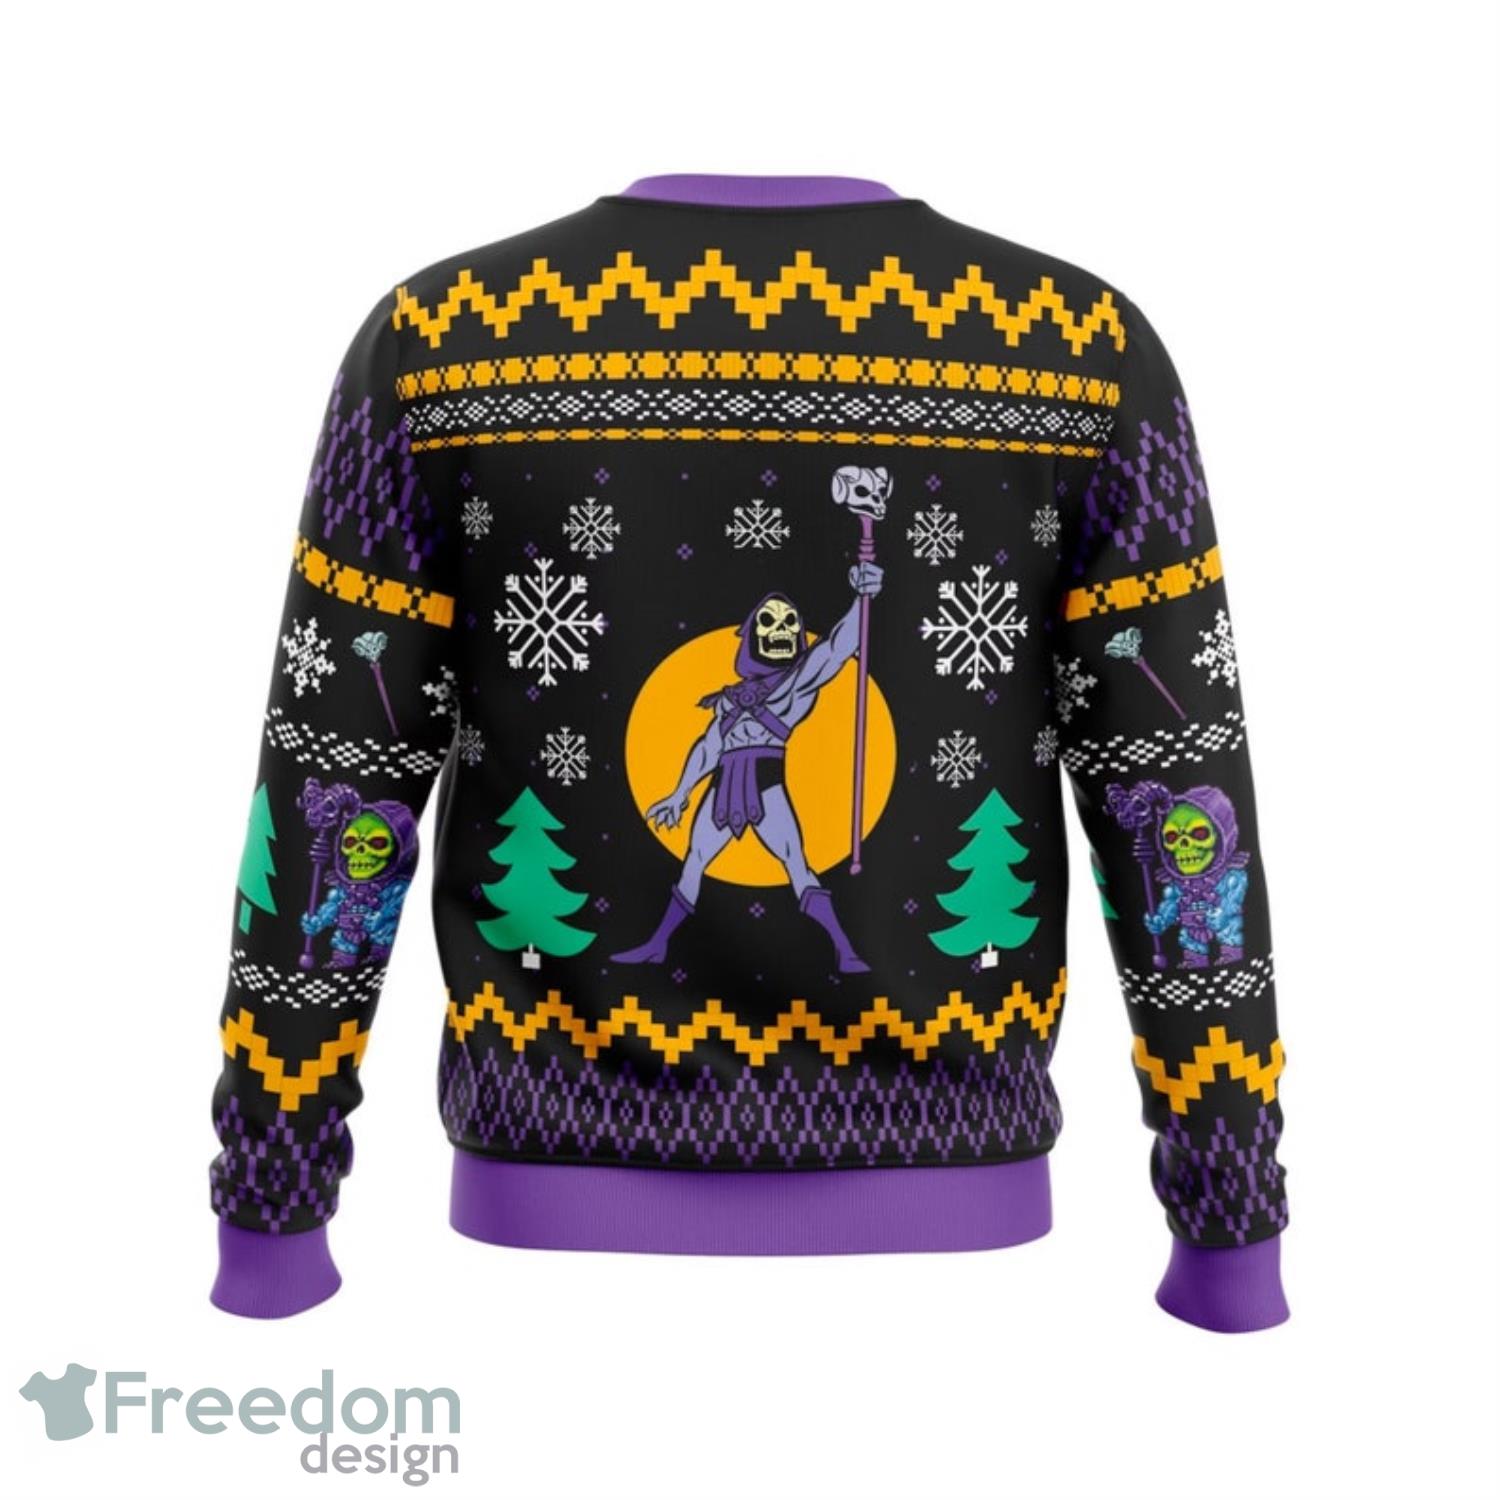 The Power of Christmas Skeletor Ugly Christmas Sweater Product Photo 1